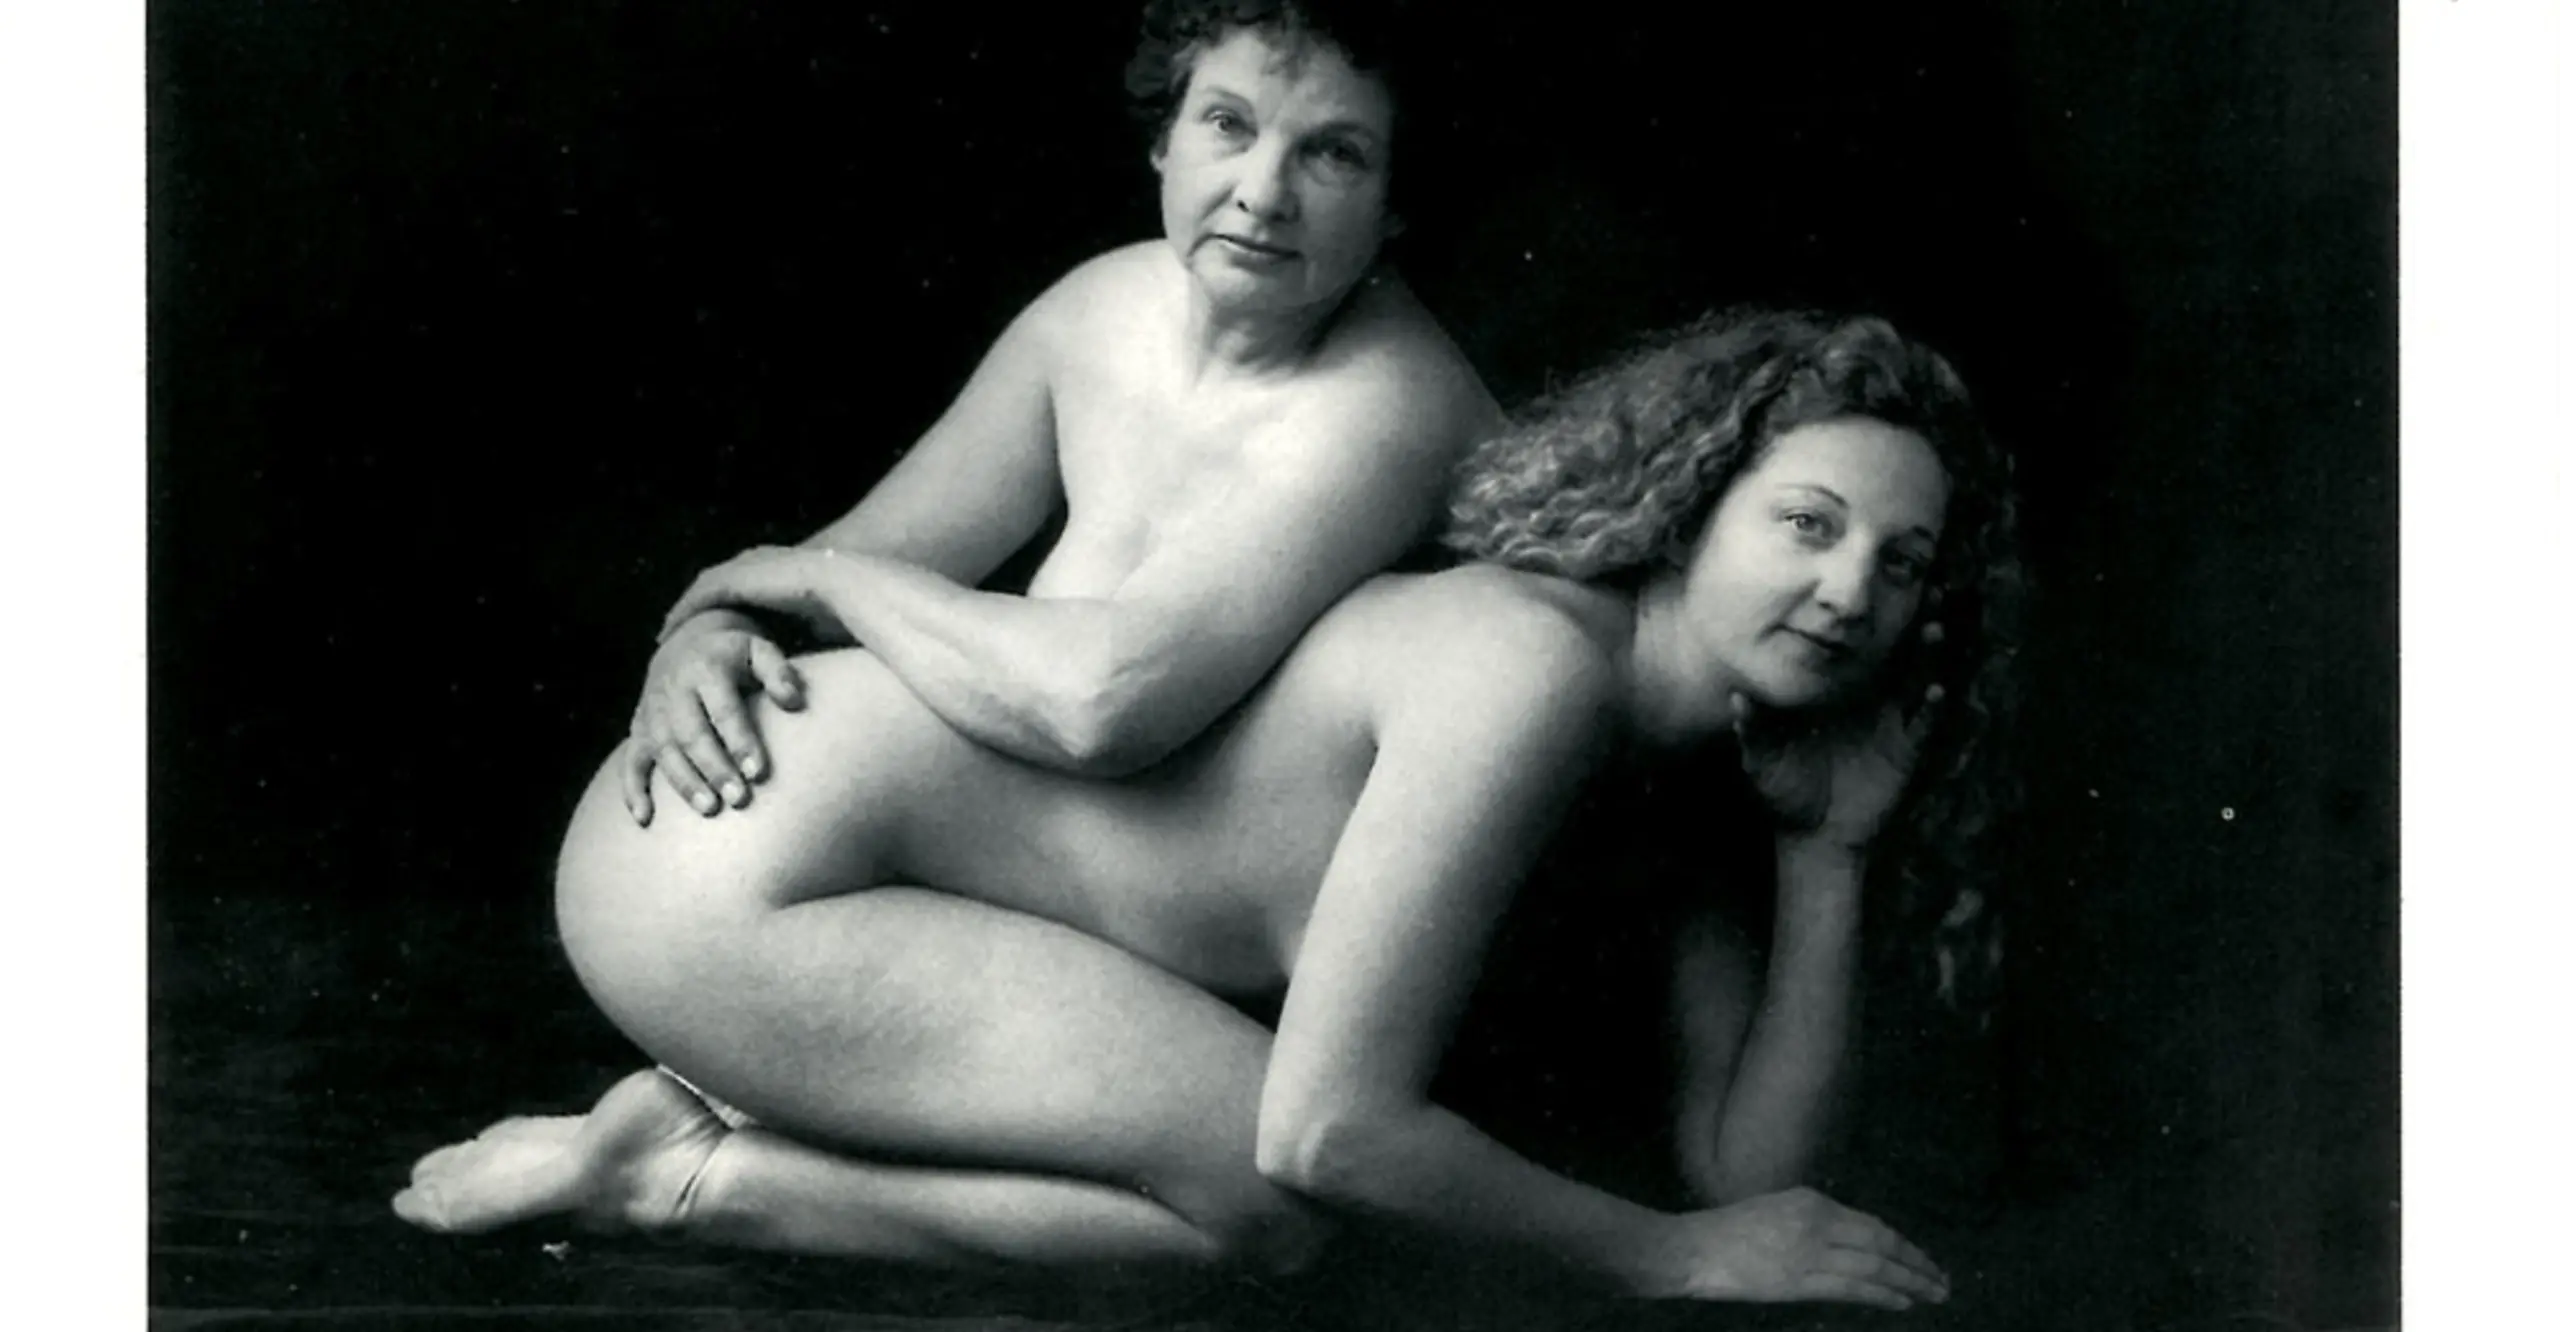 Mother and Daughter. © Diana Block,1986. Private view card front cover, The Body Politic: Re-Presentations of Sexuality, 1987 